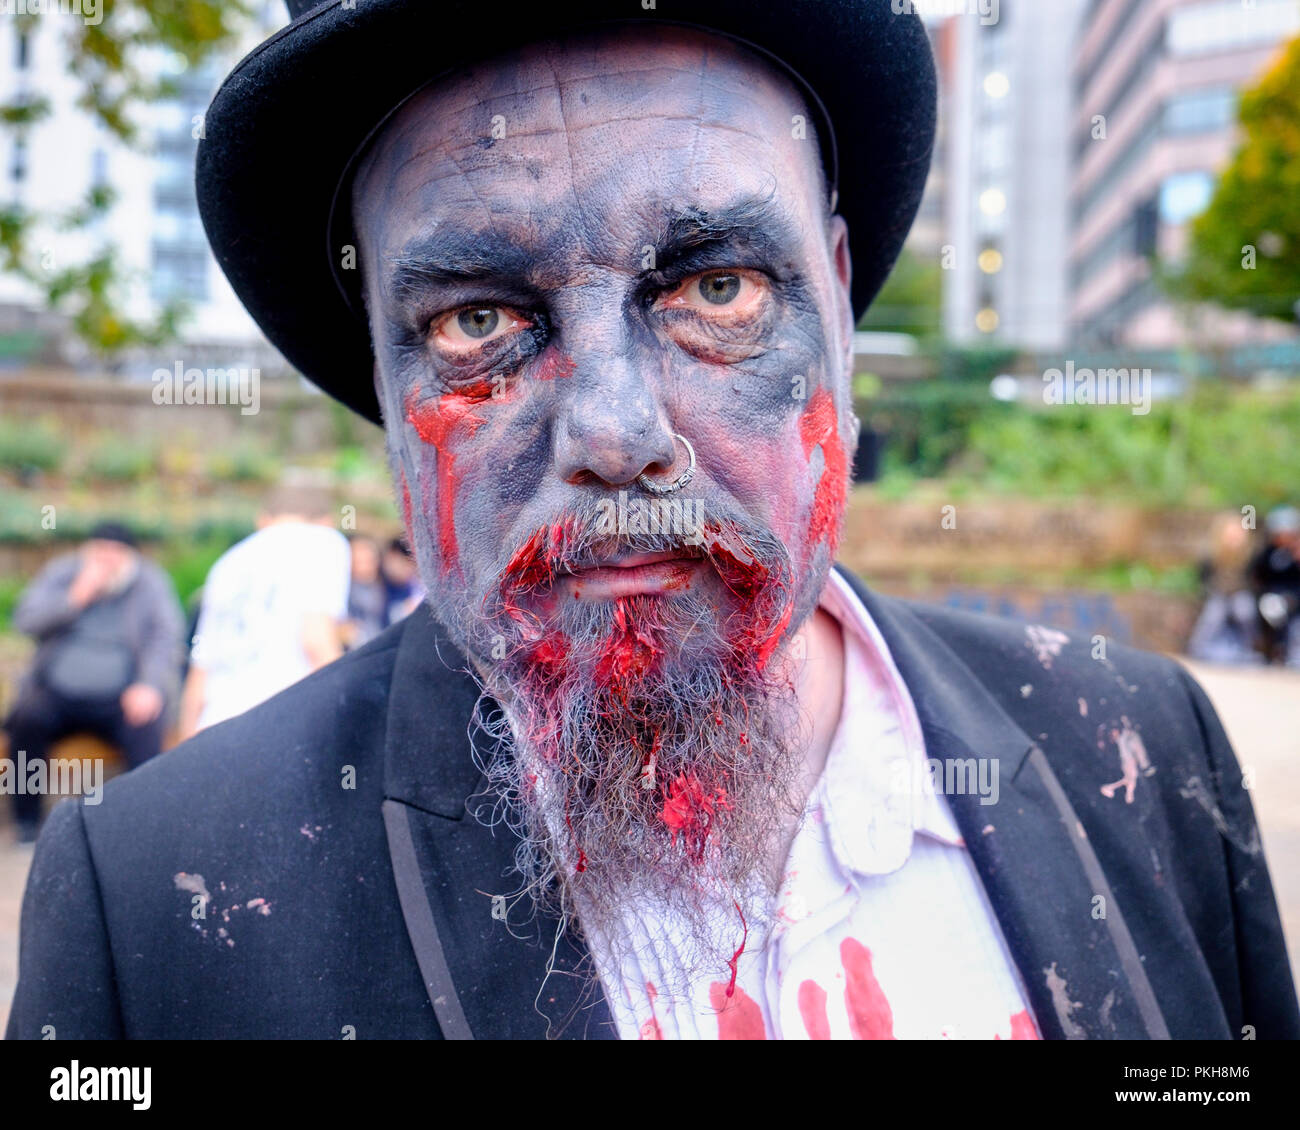 Bristol, UK. 28th Oct, 2017. A man dressed as a zombie is pictured as he takes part in in a zombie walk through the city centre. Stock Photo